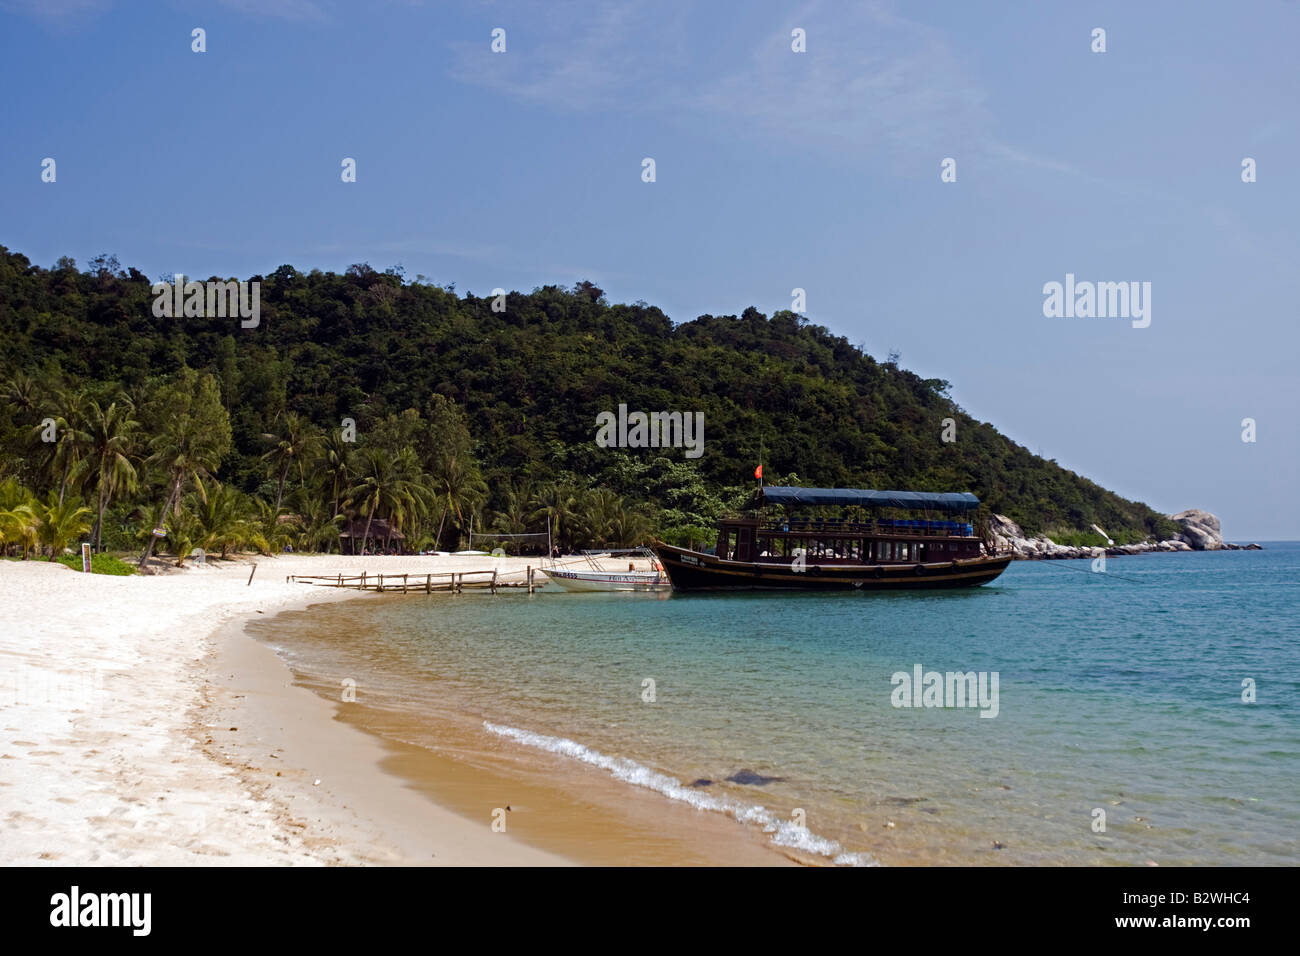 Palm trees and boat sandy beach Cham Island off historic Hoi An Vietnam Stock Photo